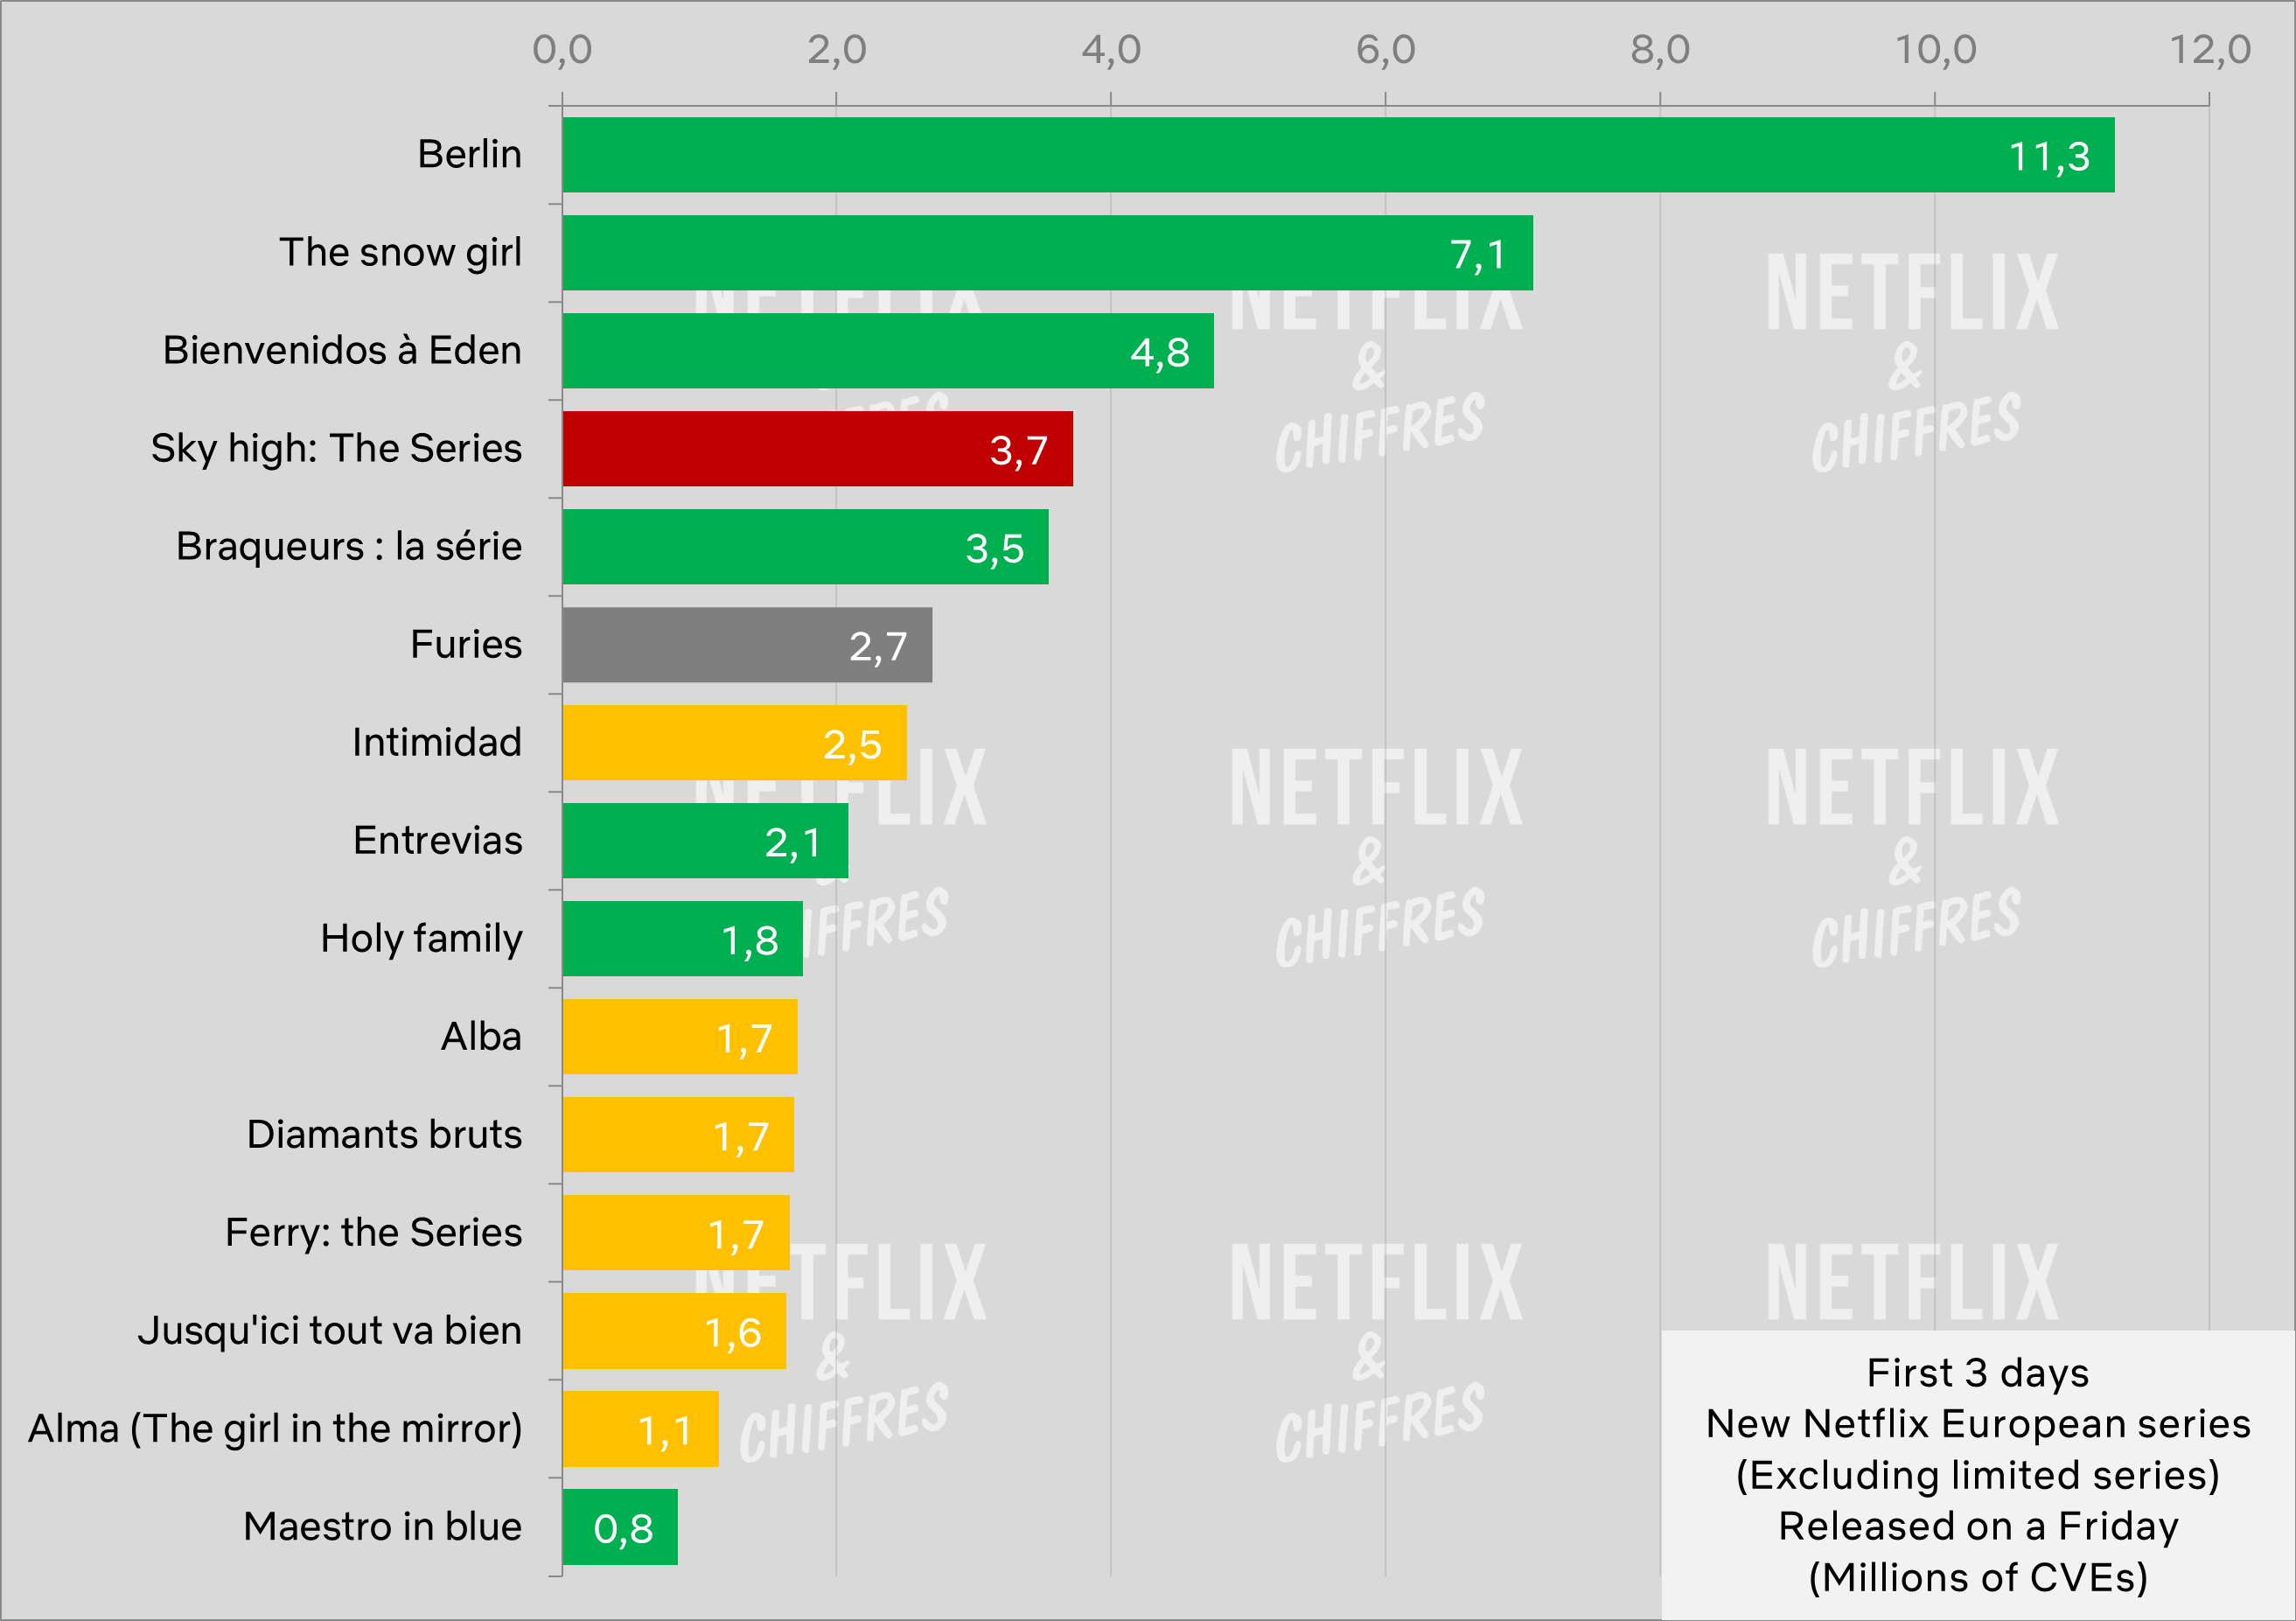 Furies Netflix Launch Vs Other Netflix French Titles